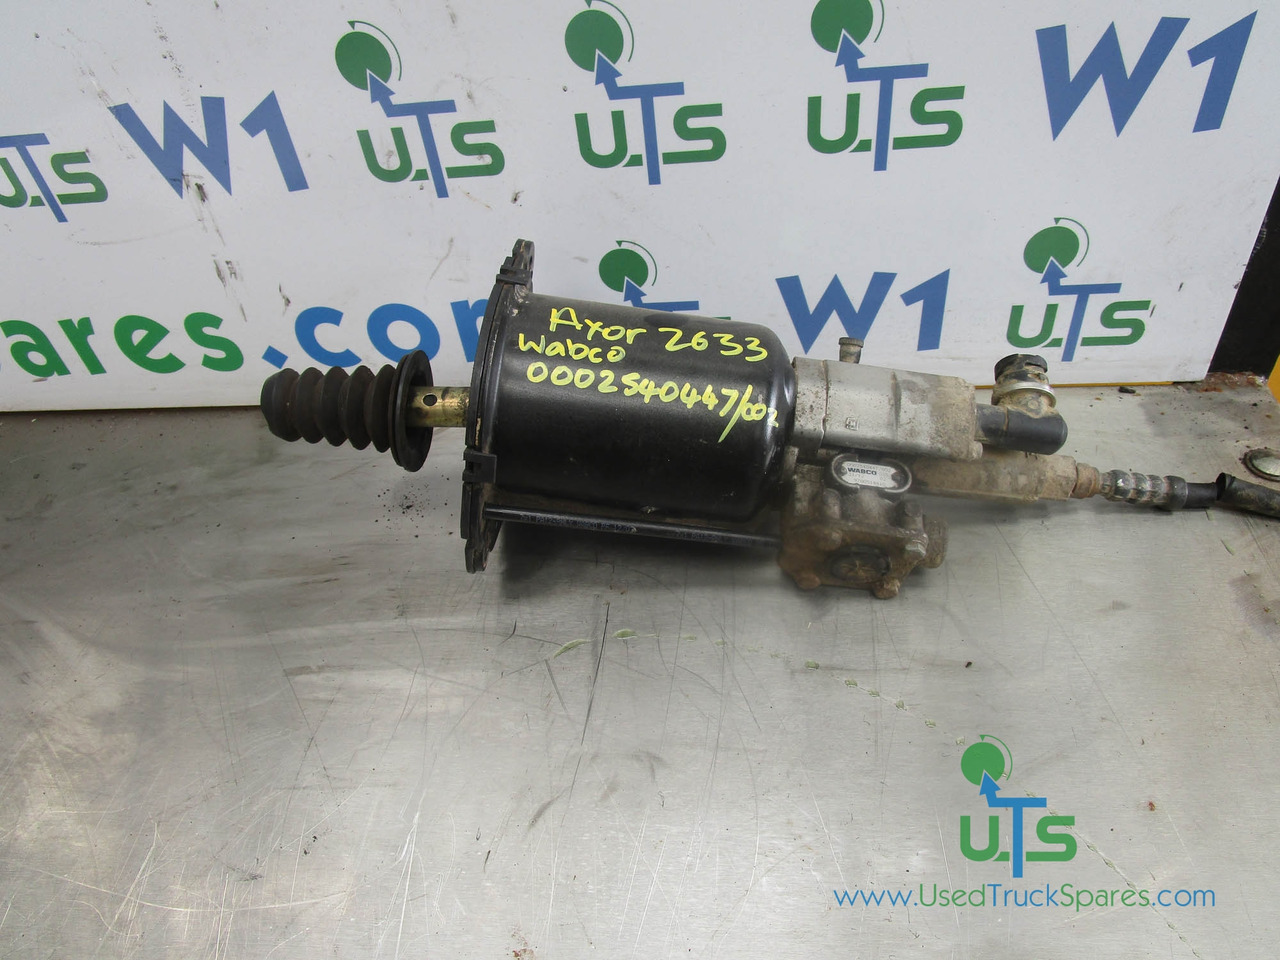 MERCEDES AXOR 2633 OM926 WABCO CLUTCH PACK P/NO 0002540447/002 - Engine and parts for Truck: picture 1